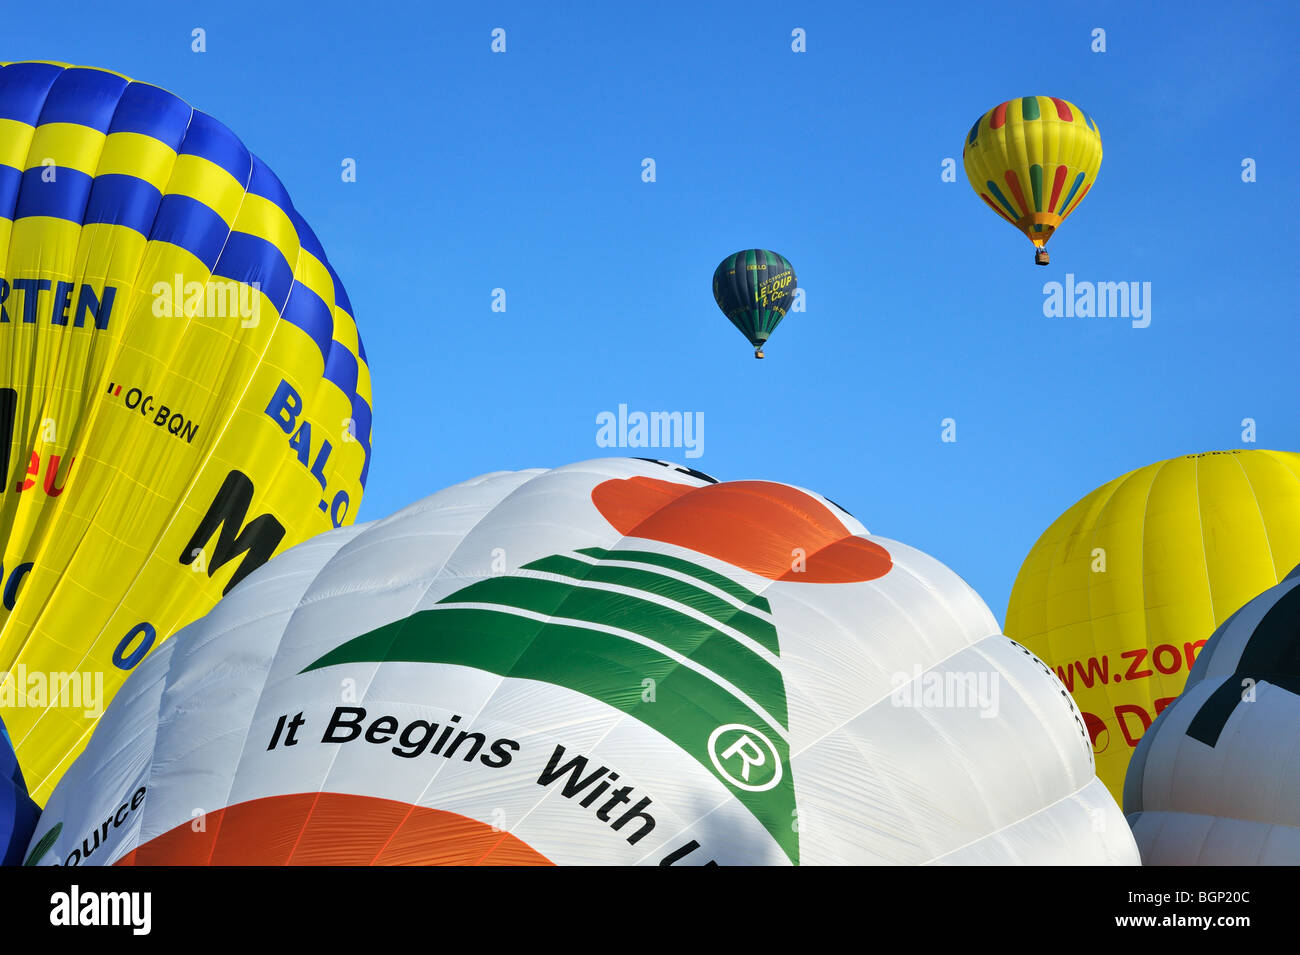 Balloonists / Aeronauts flying with hot-air balloons during hot air ballooning meeting Stock Photo